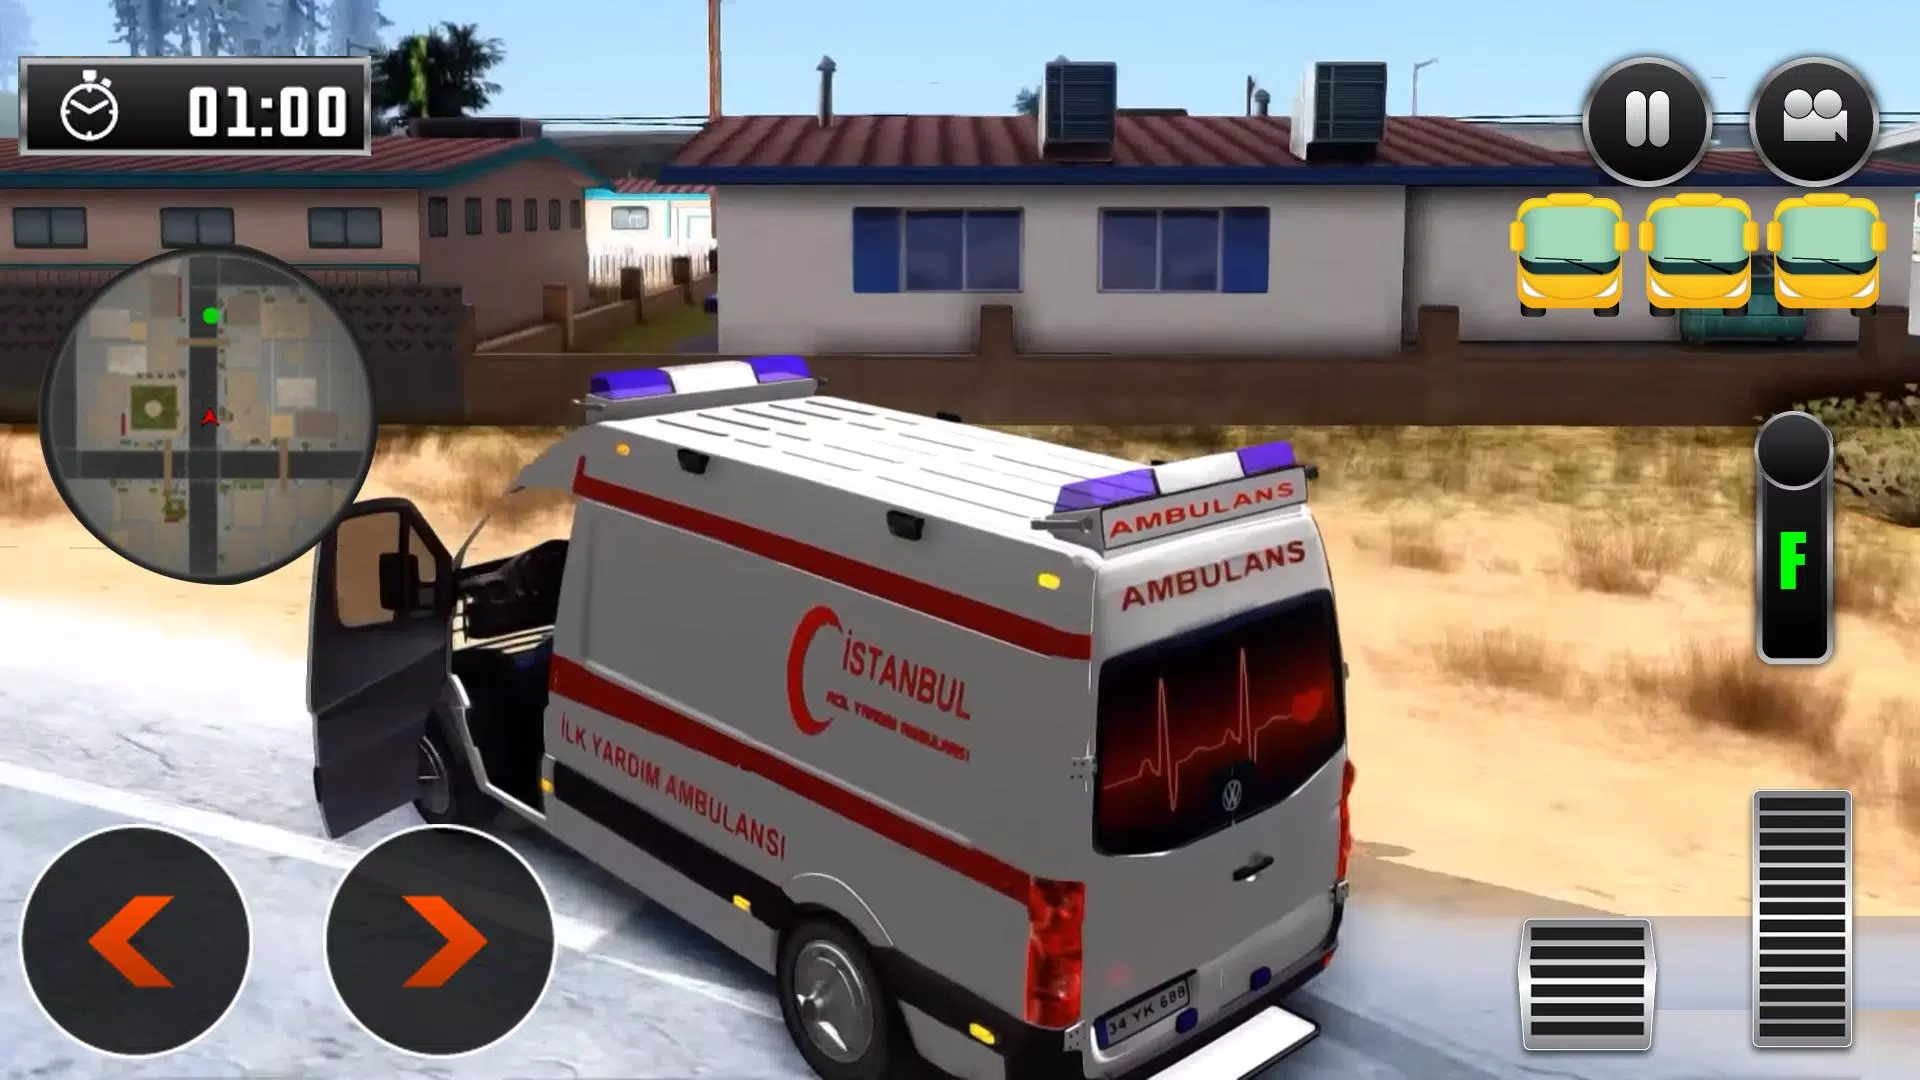 Ambulance Simulator 2018 for Android - APK Download